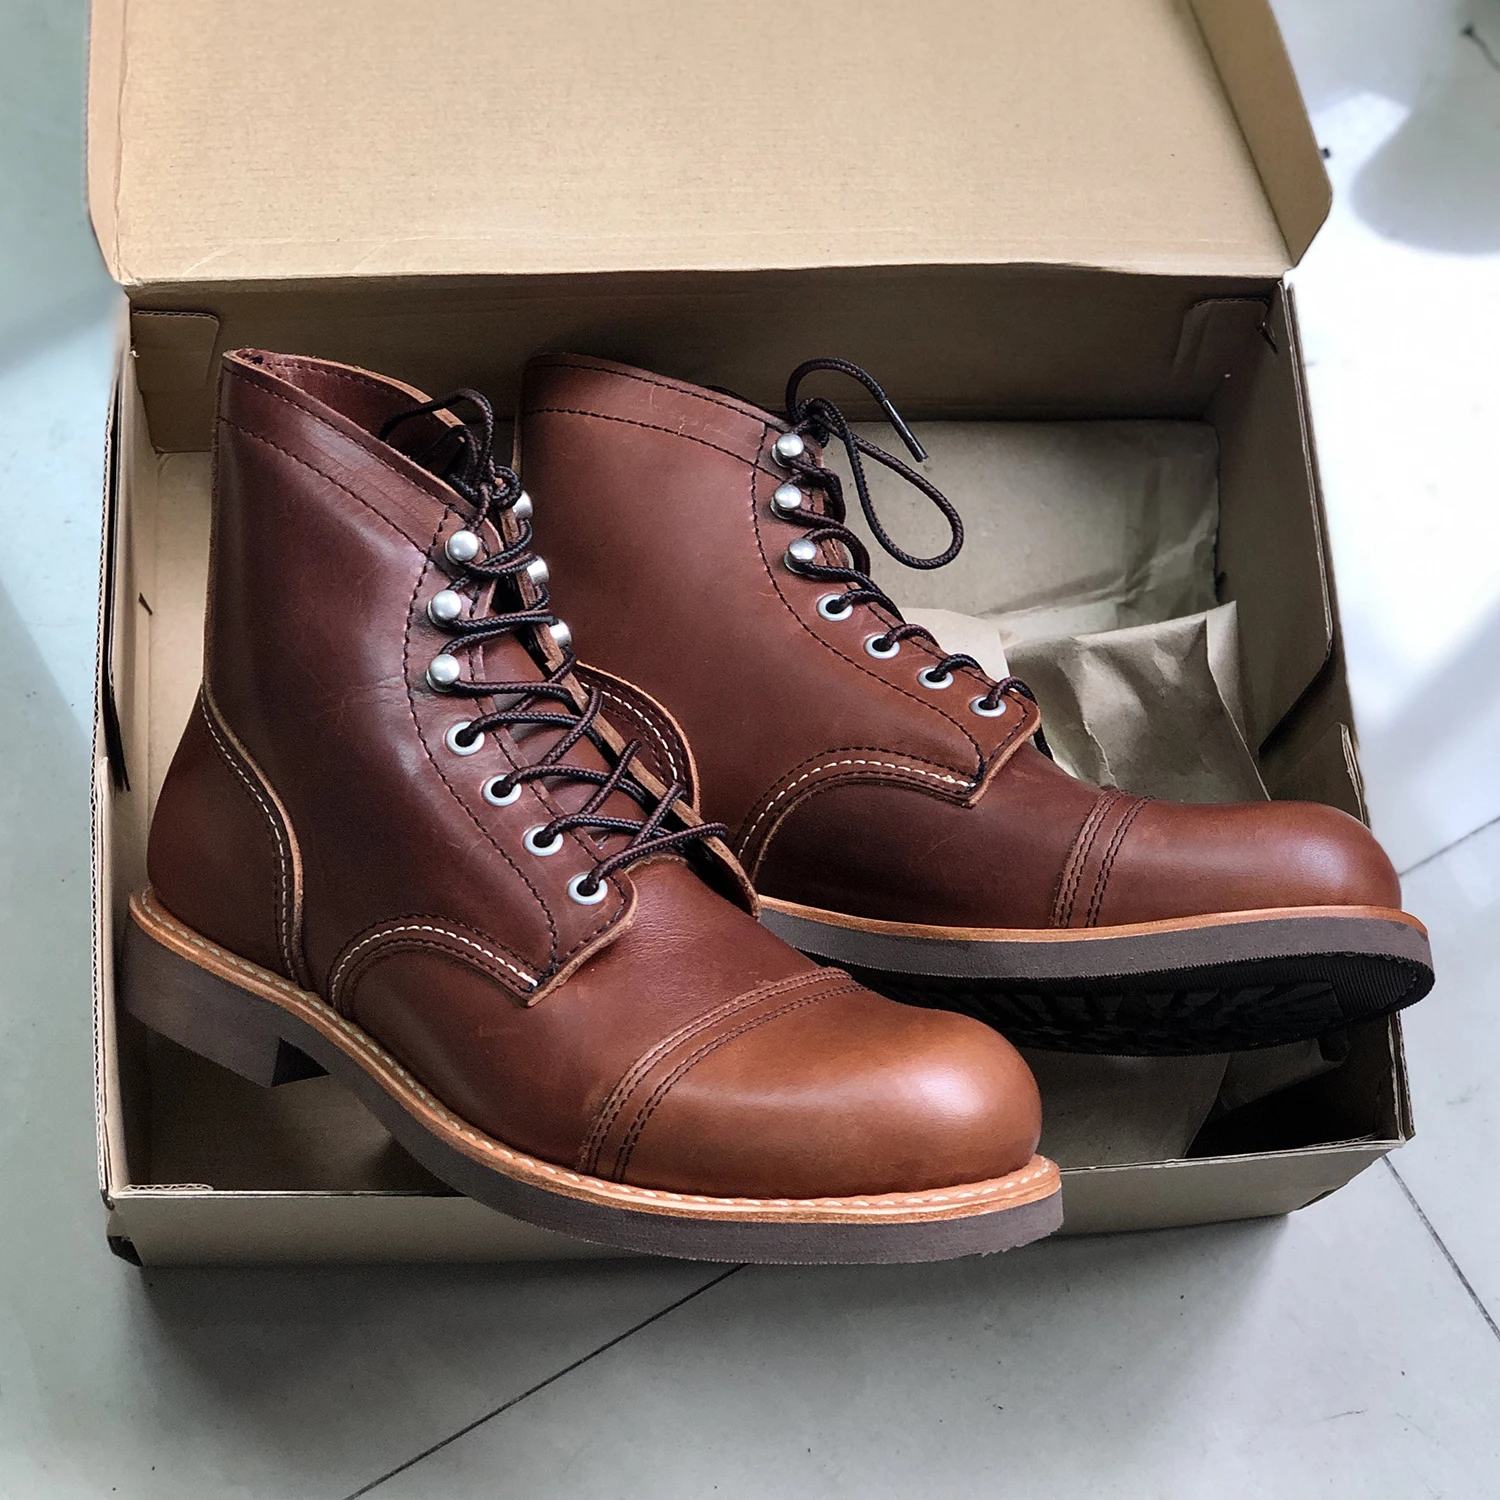 Botas Durable Goodyearwelted Motorcycle Boots Martin Boots Vintage Oil Leather Genuine 8111 Red Punk para homens Asa